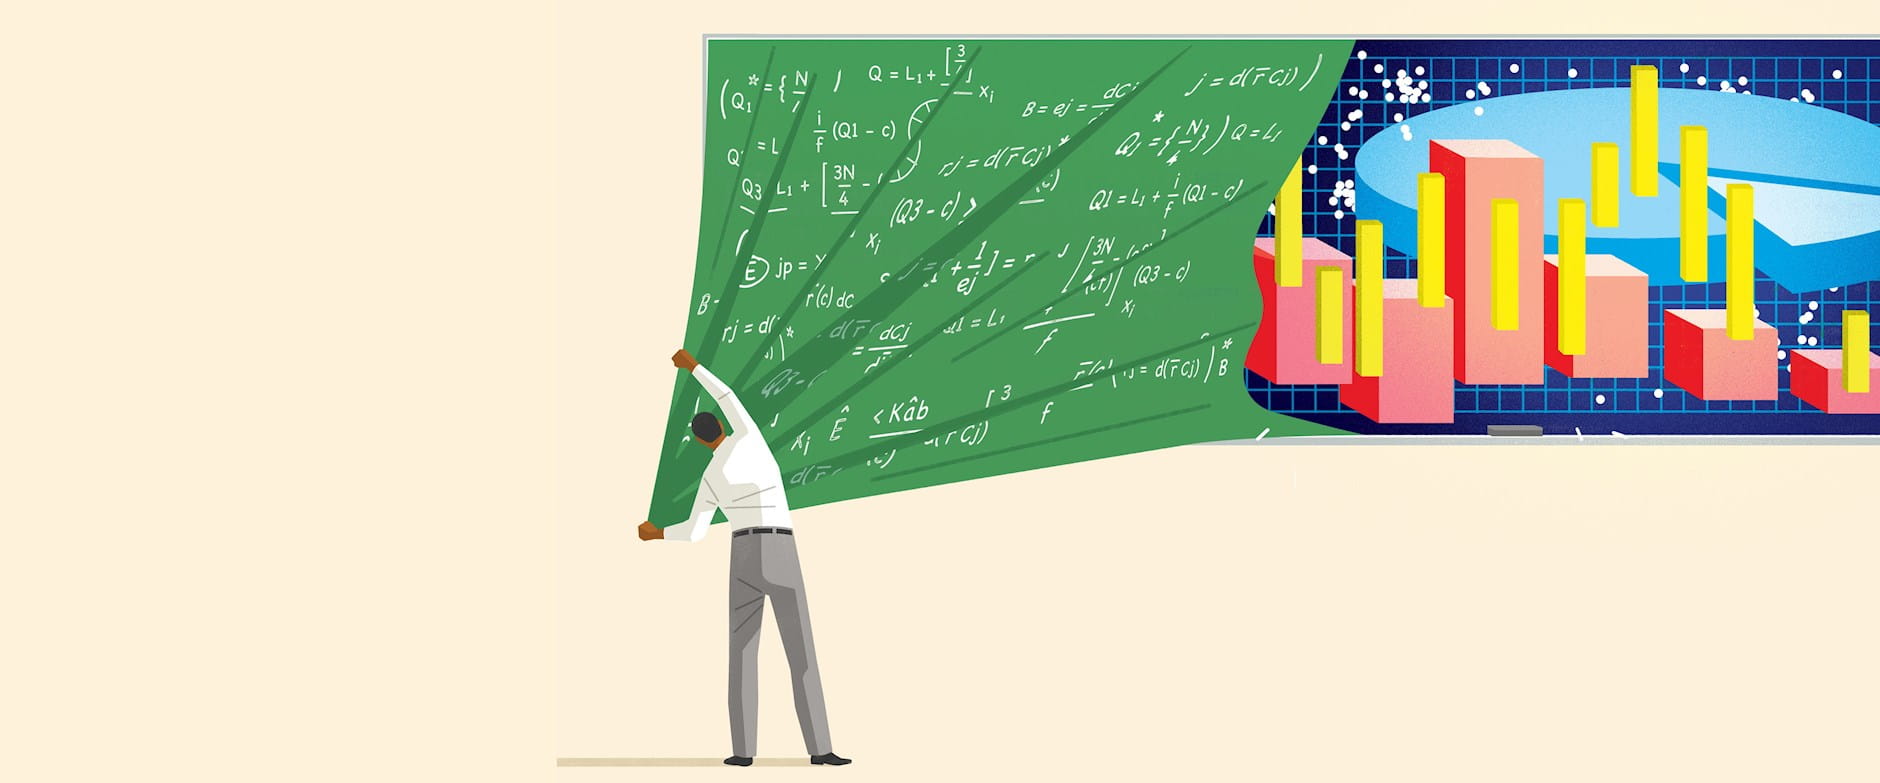 Digitally illustrated man pulling on a poster-like blackboard and graphs on the wall